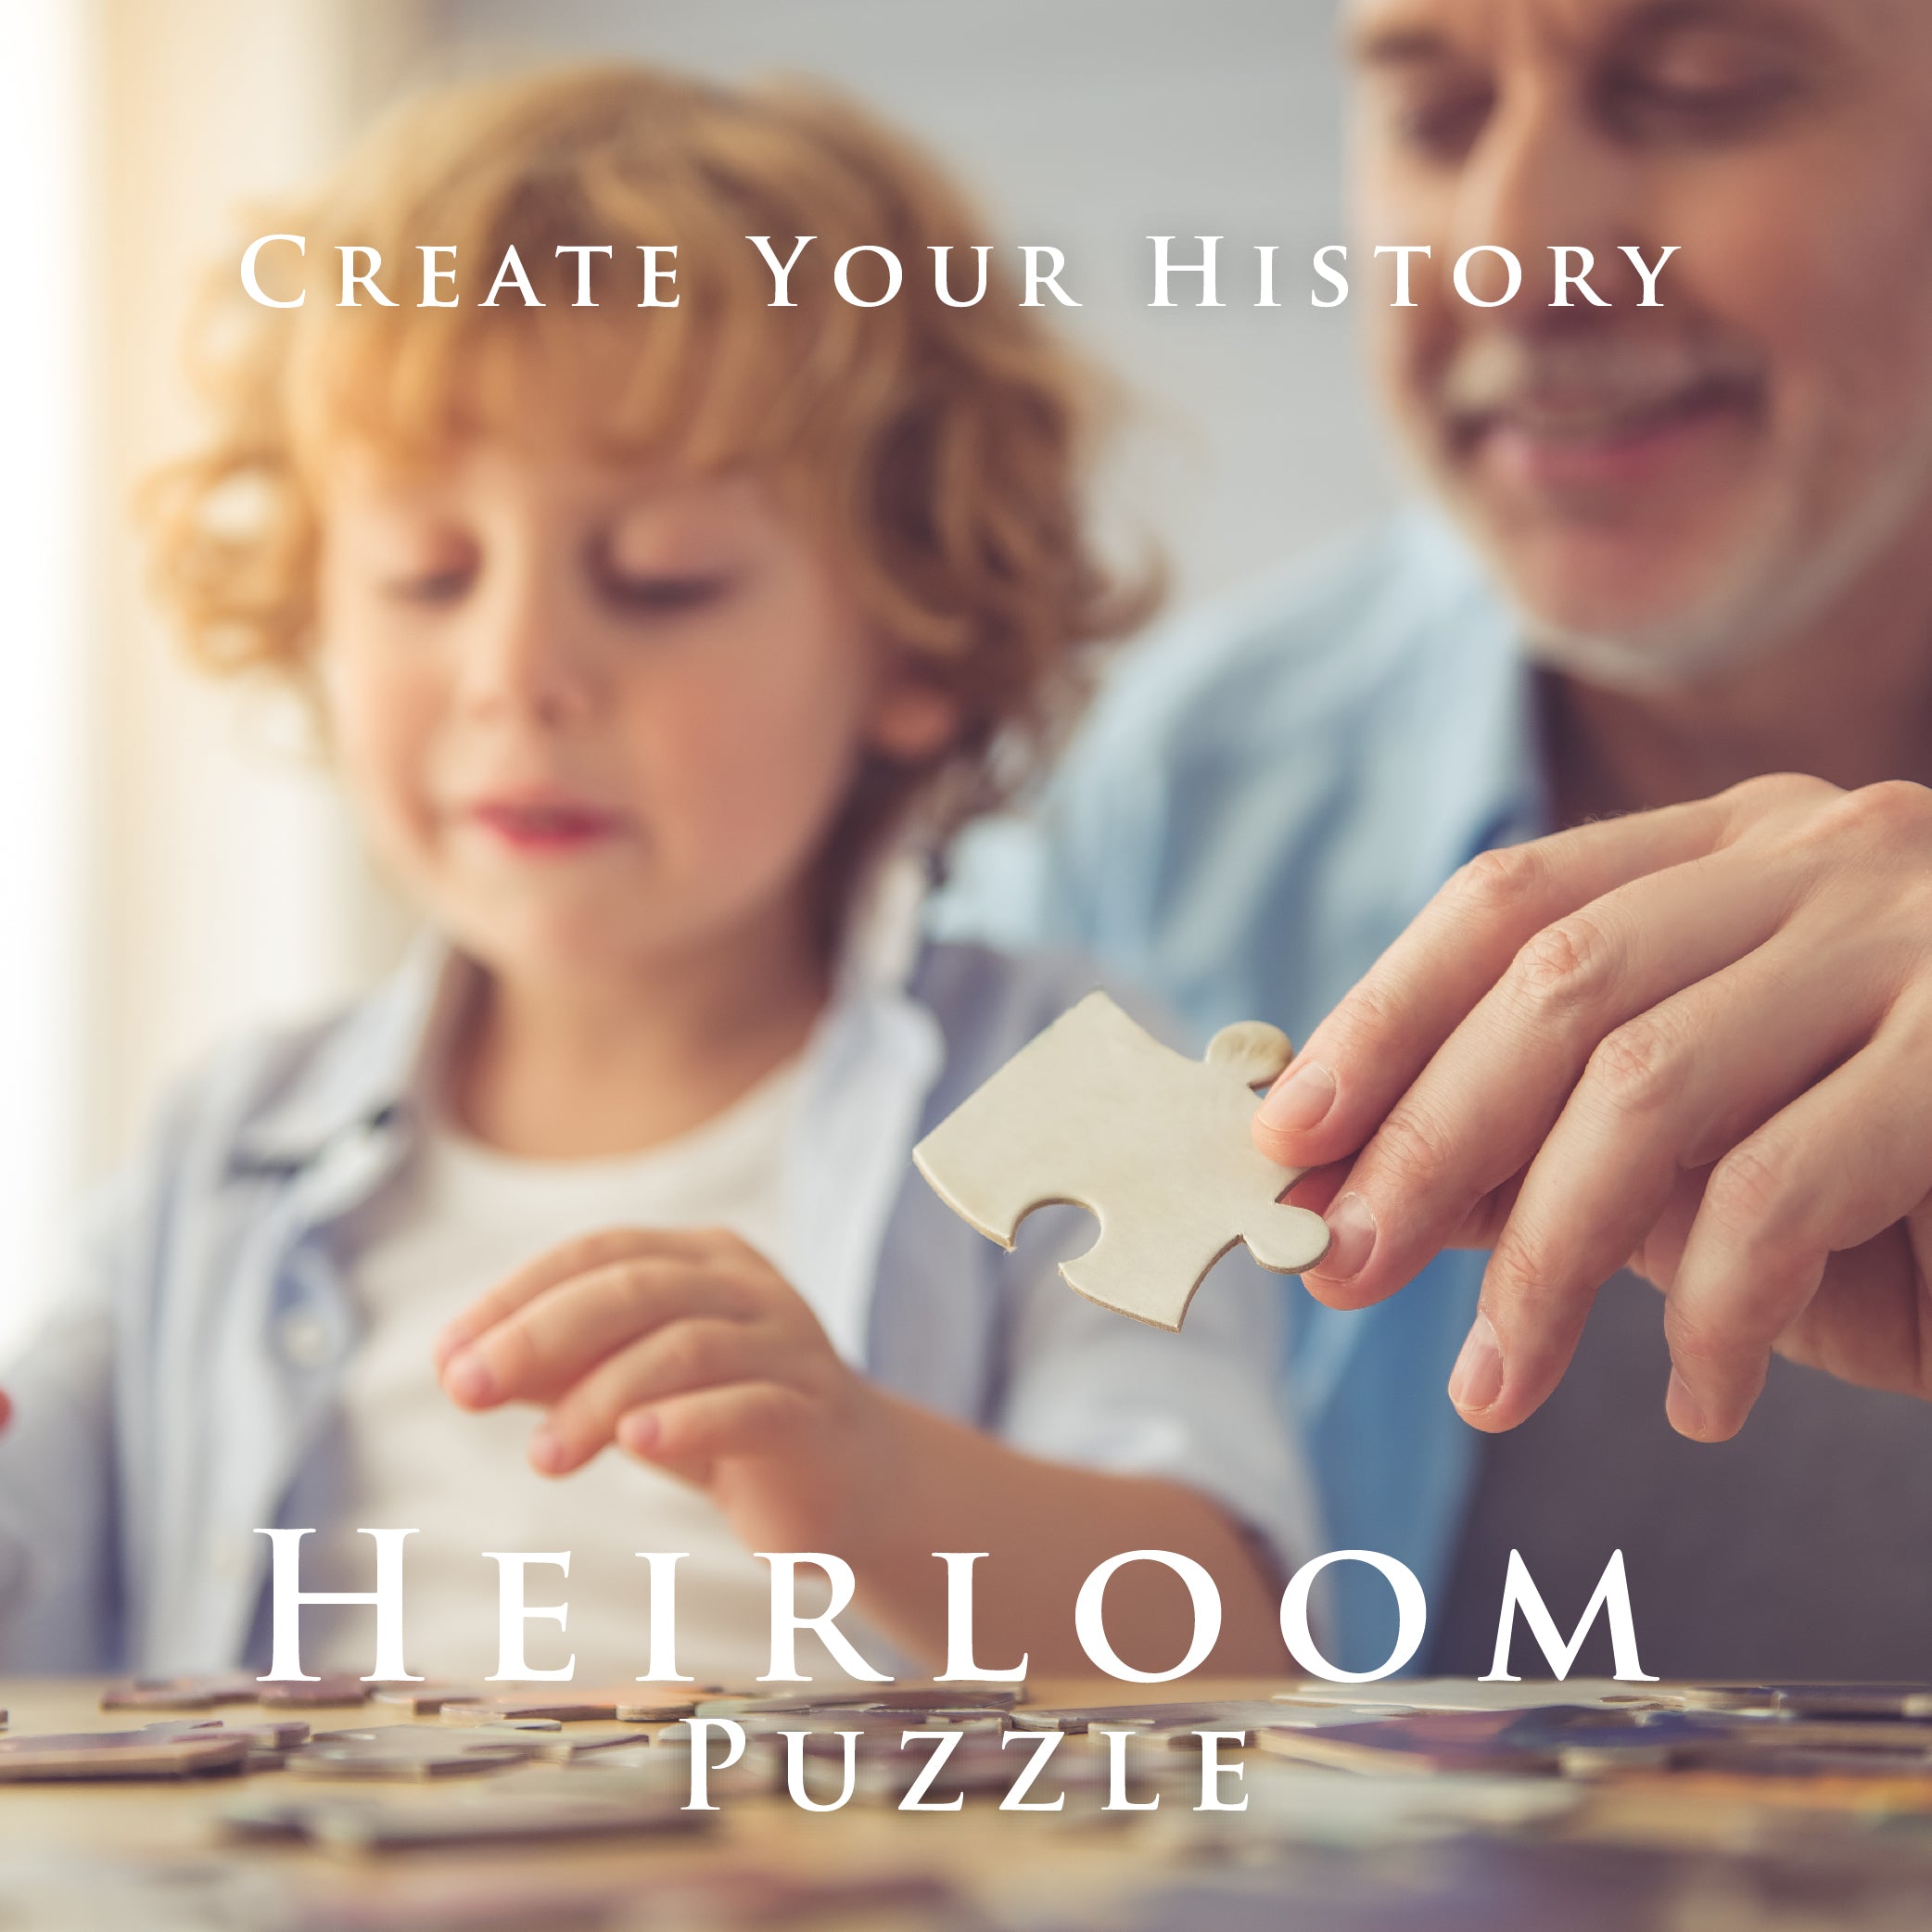 “Create Your History” Heirloom Puzzle